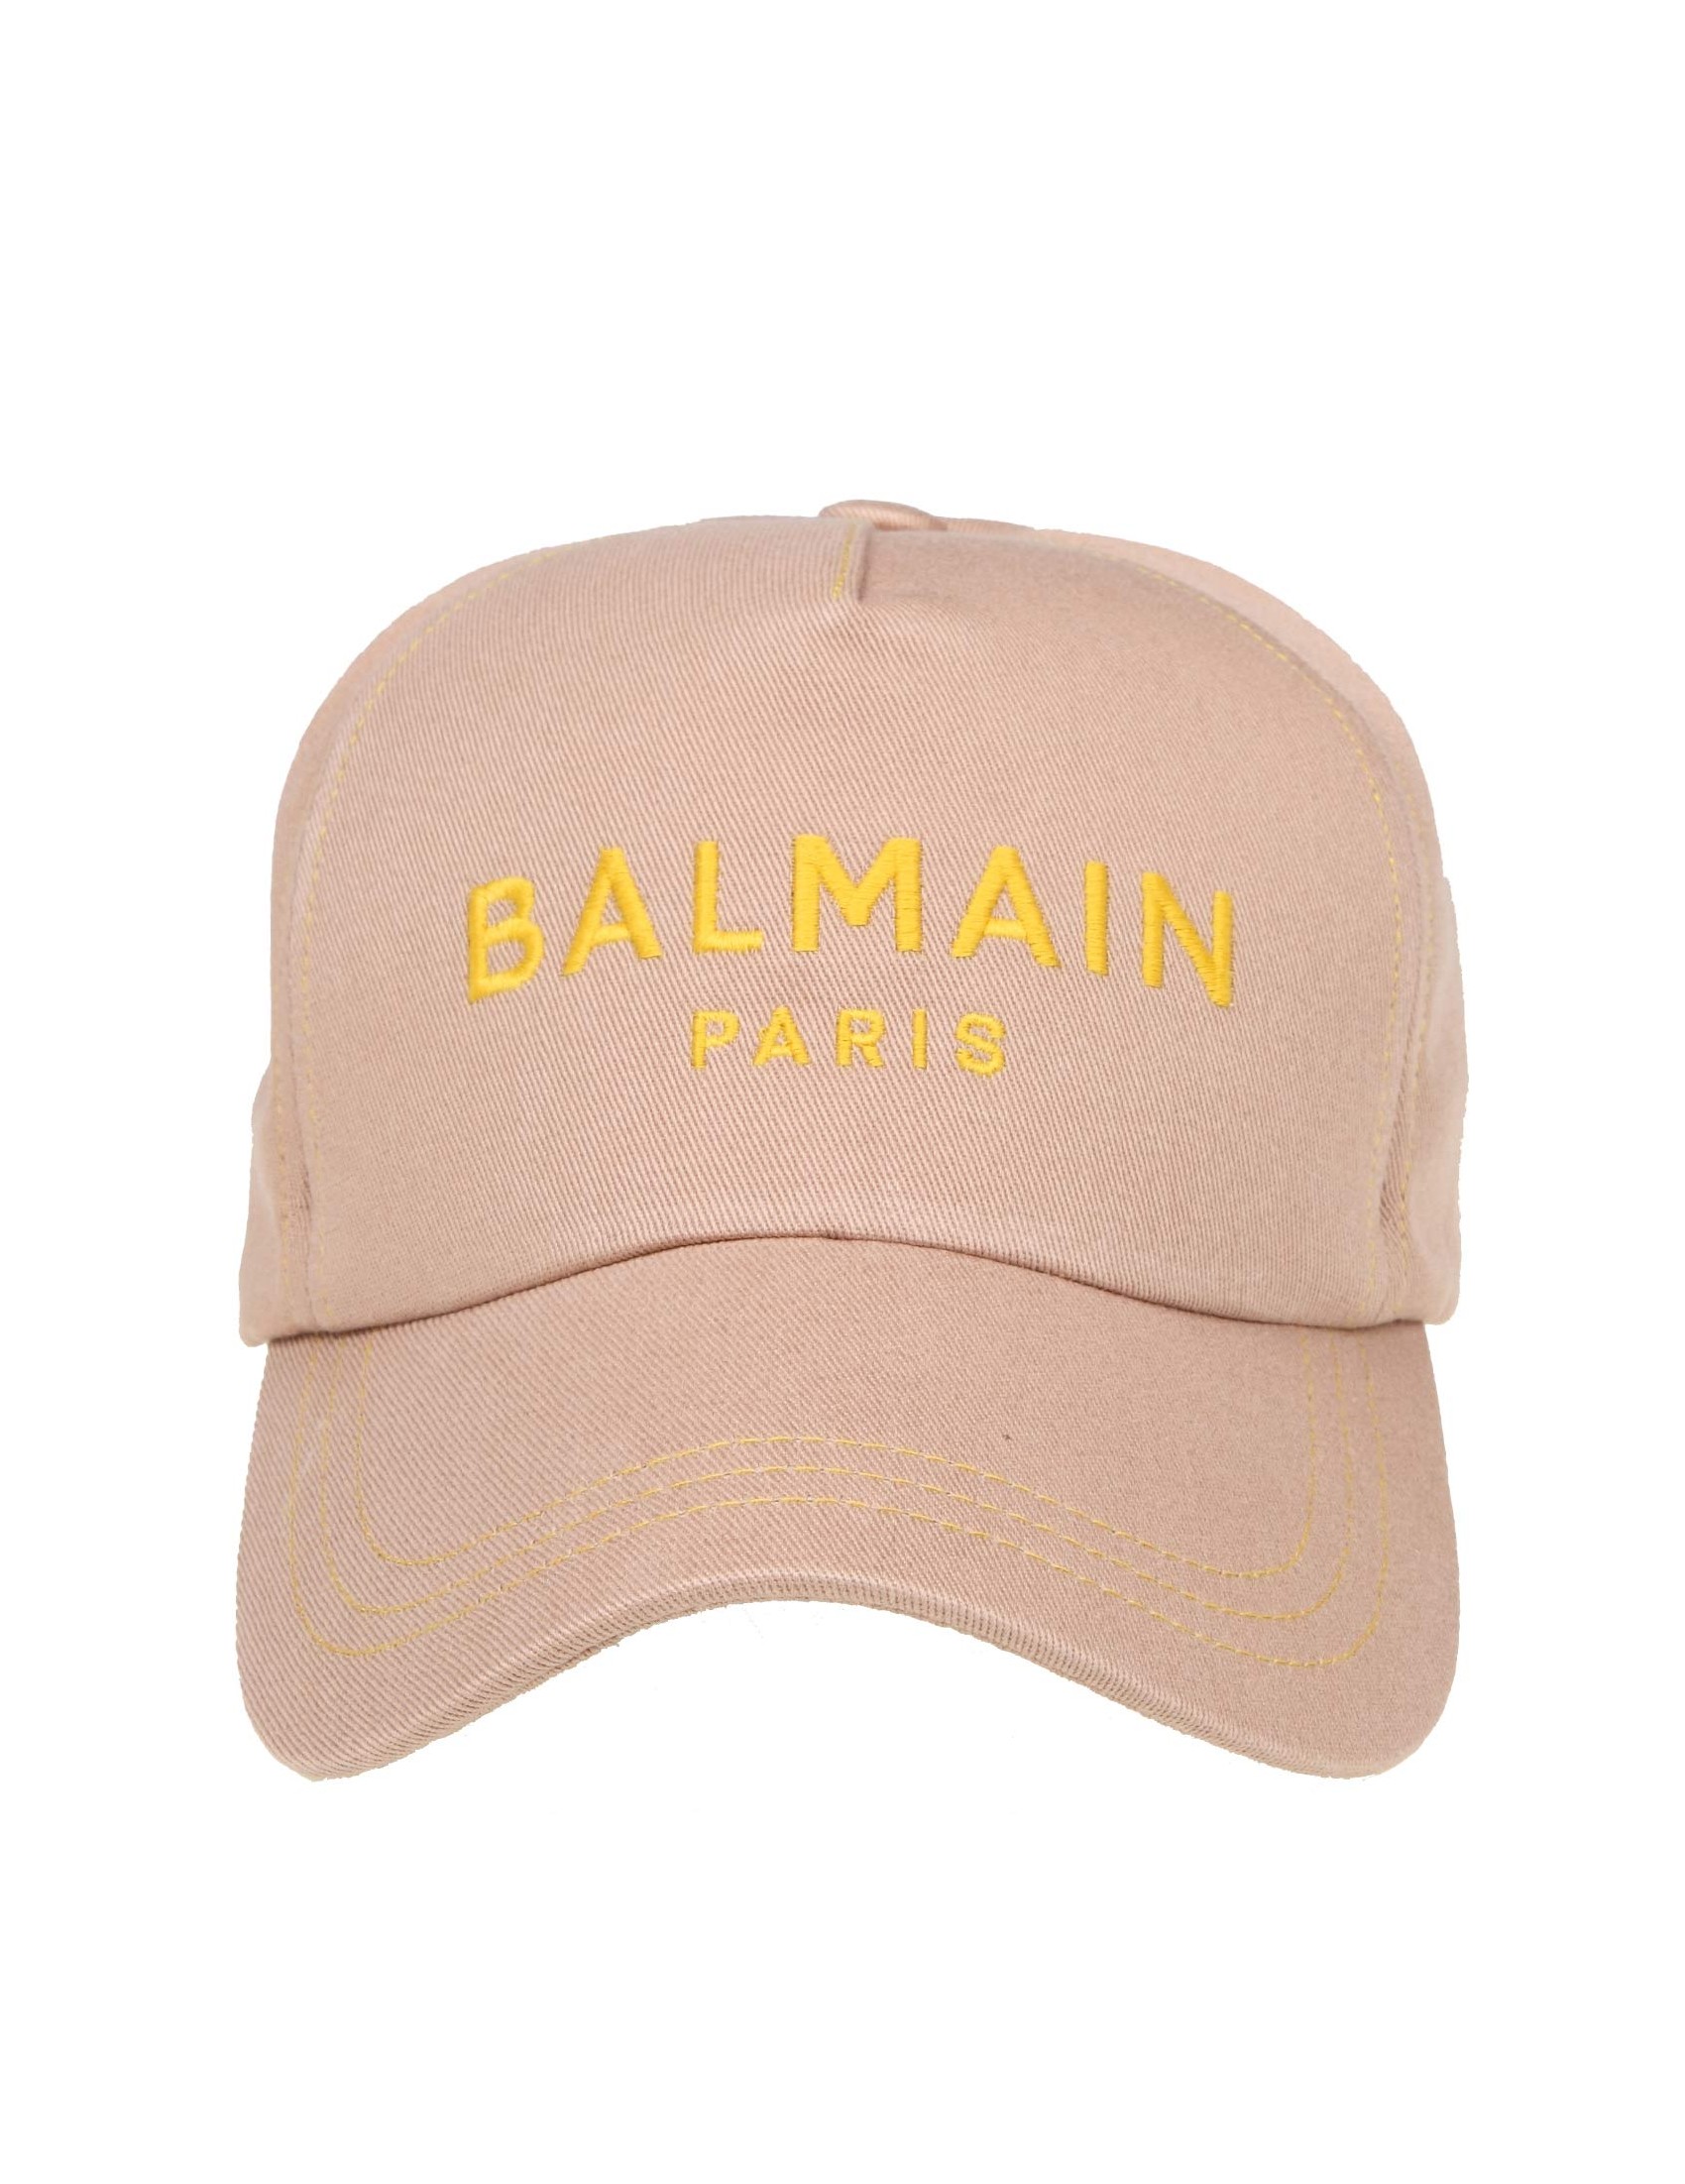 BALMAIN COTTON HAT WITH EMBROIDERED LOGO